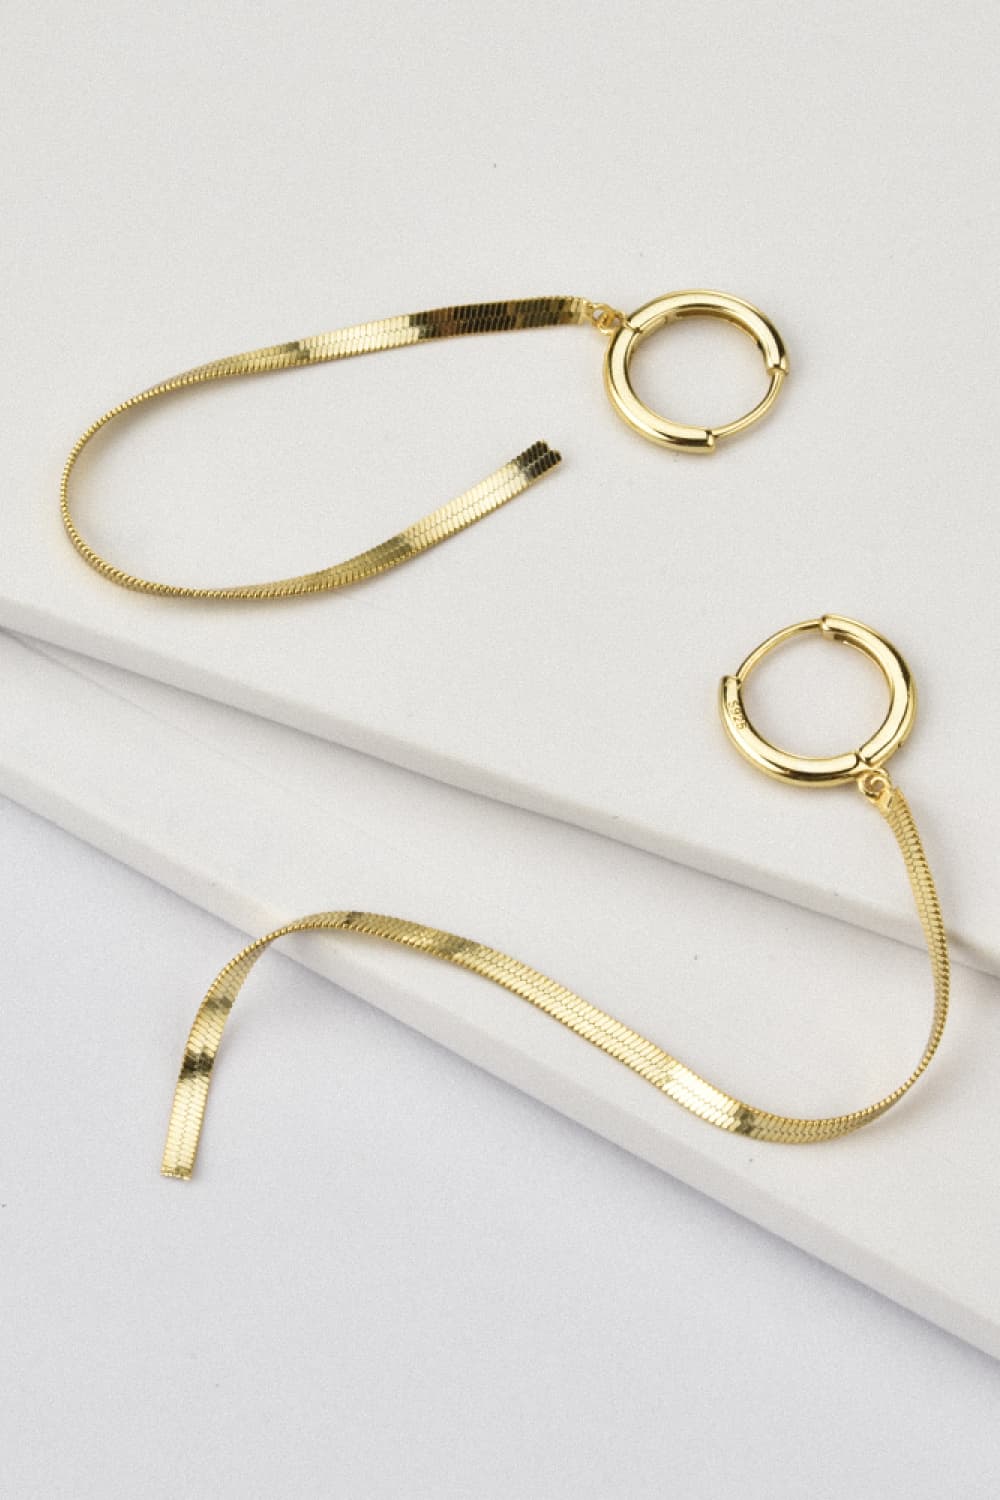 GOLD ONE SIZE - 925 Sterling Silver Snake Earrings - earrings at TFC&H Co.